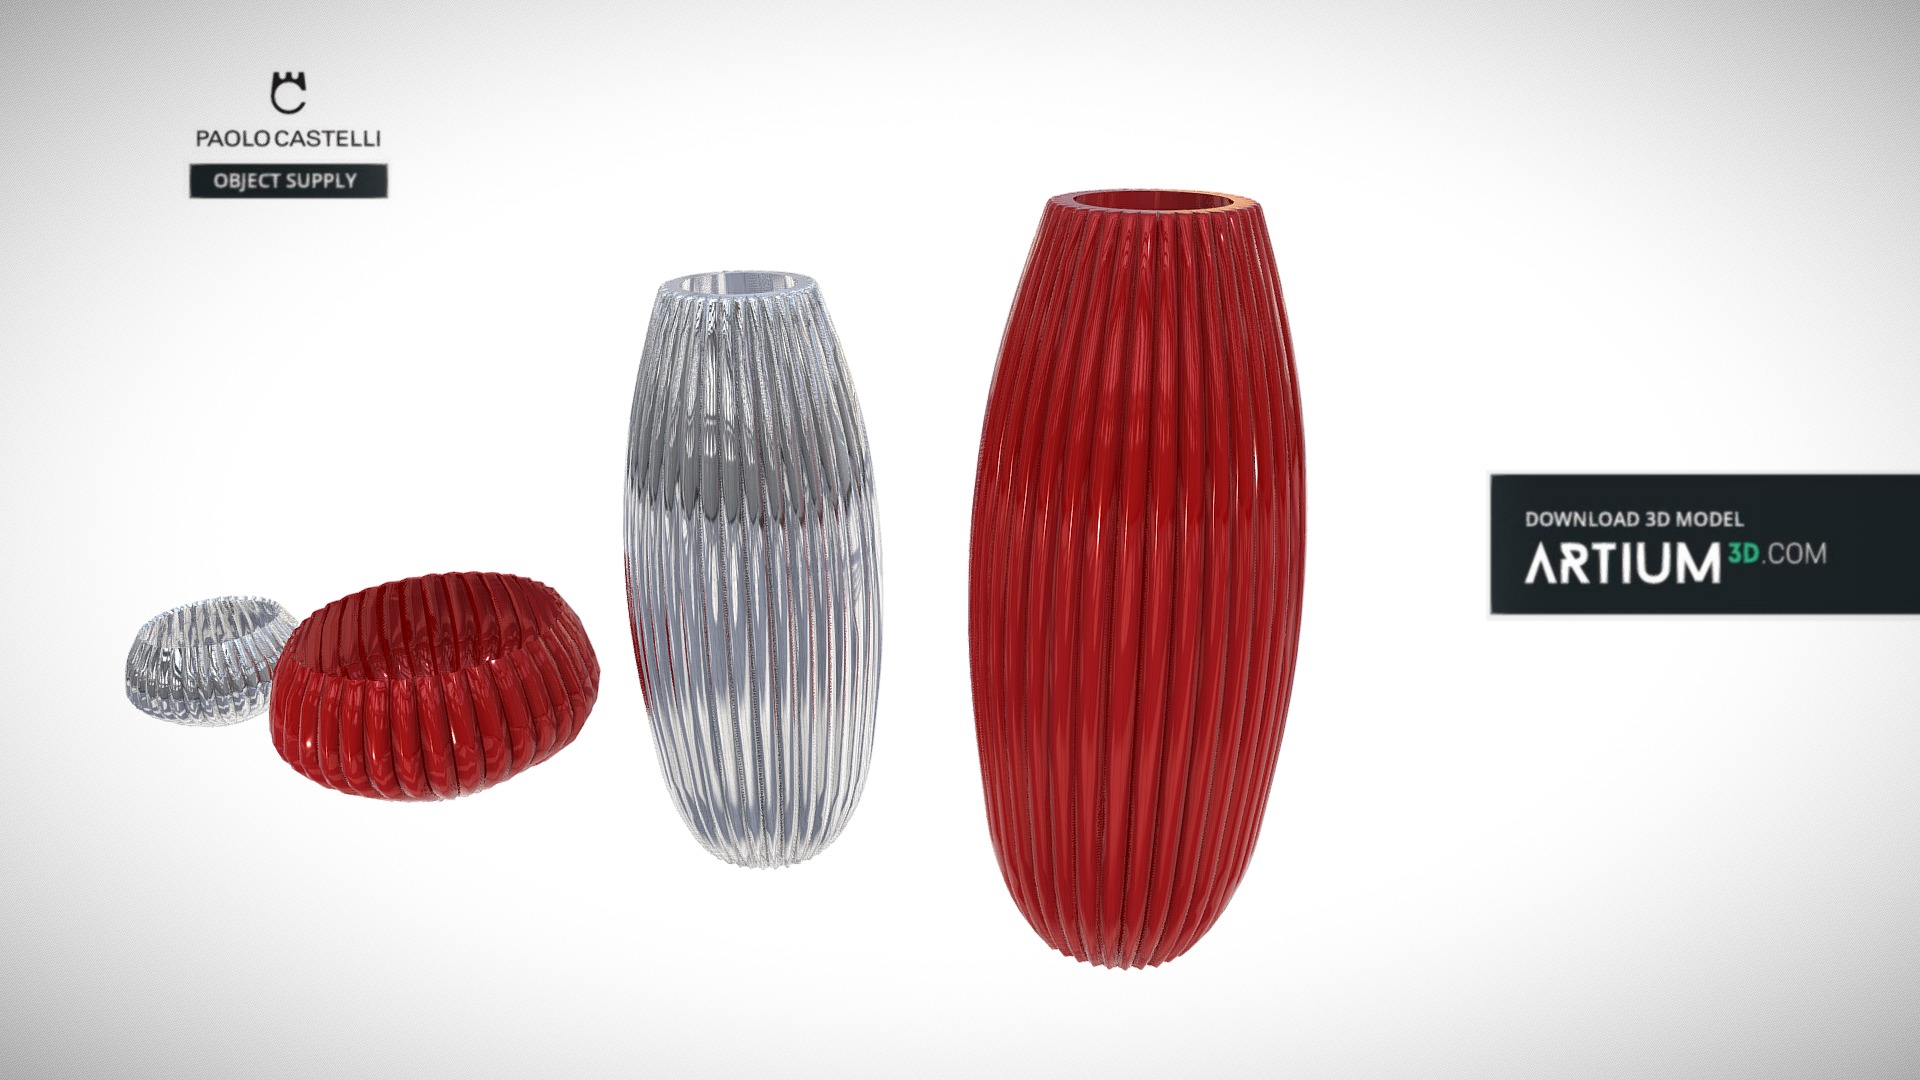 3D model Murano Vases from Paolo Castelli - This is a 3D model of the Murano Vases from Paolo Castelli. The 3D model is about a group of different colored vases.